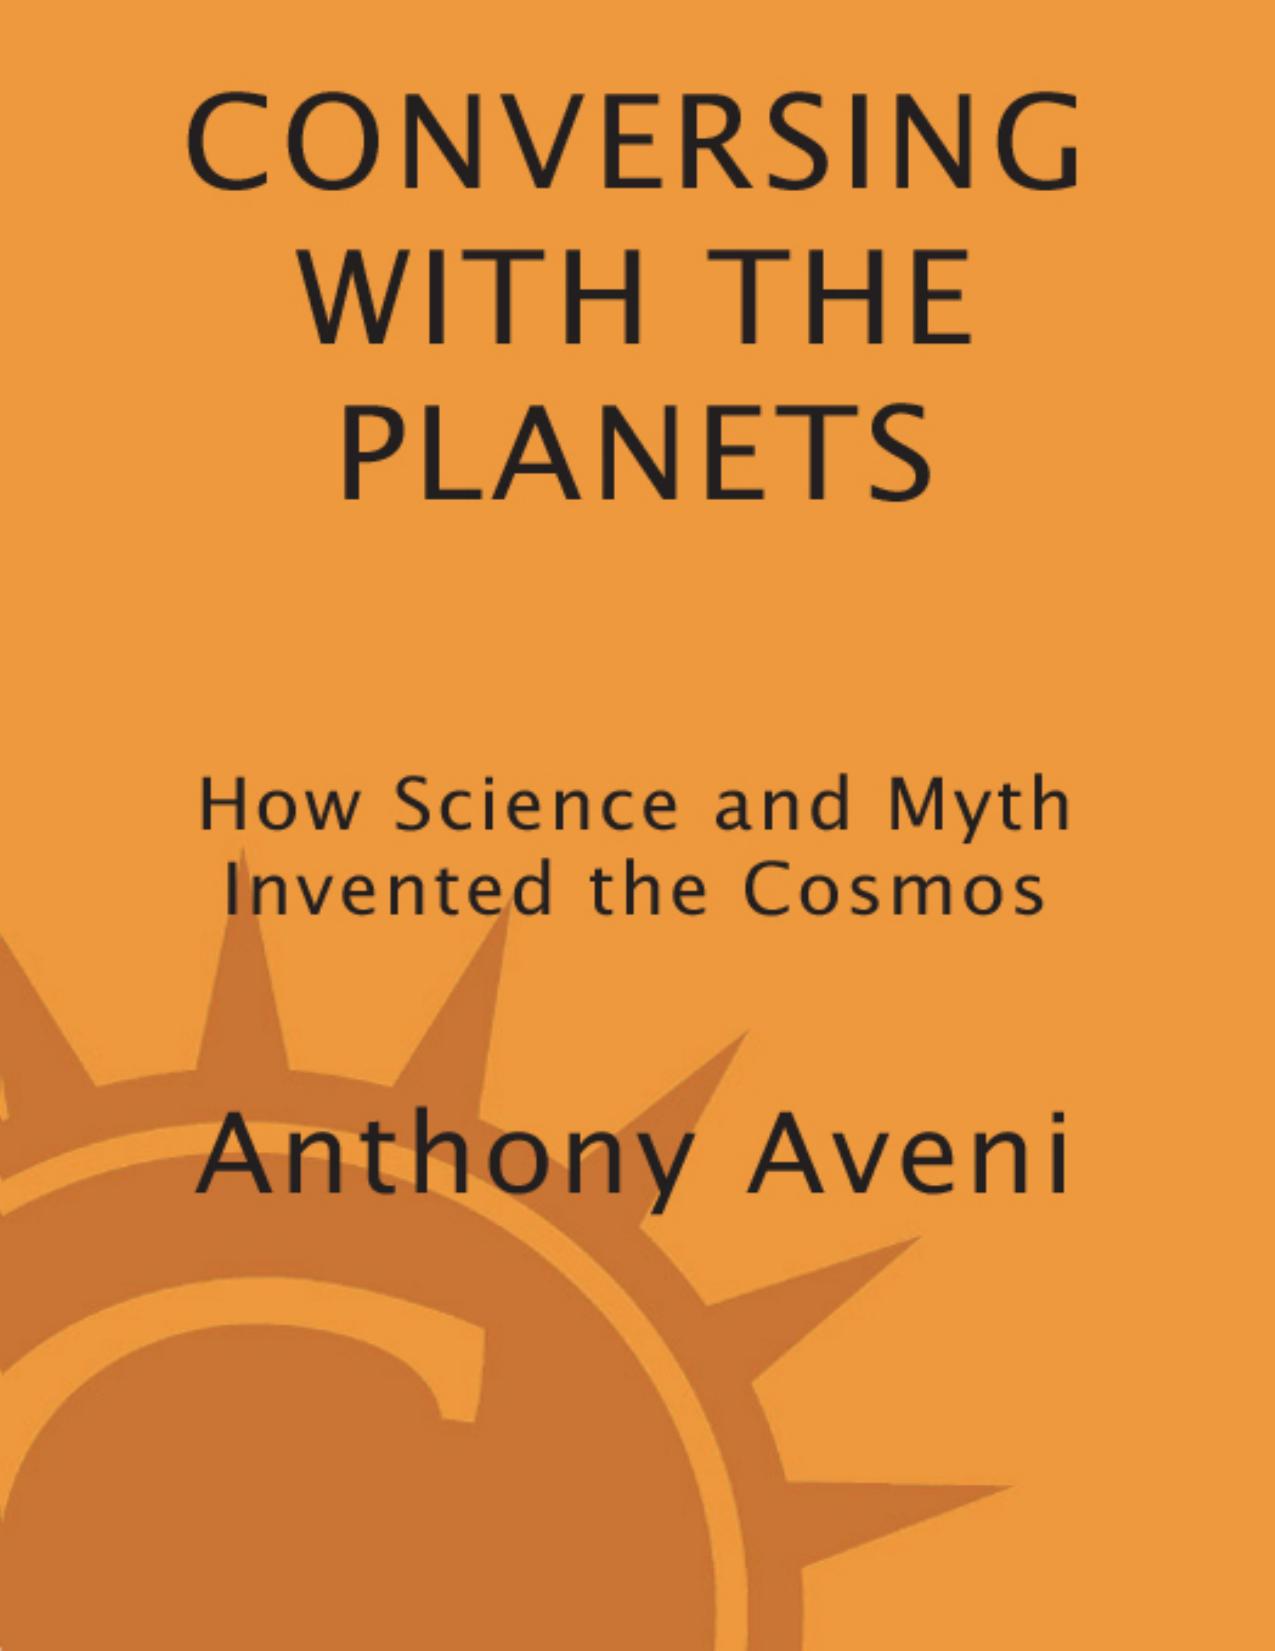 Conversing with the Planets by Anthony Aveni